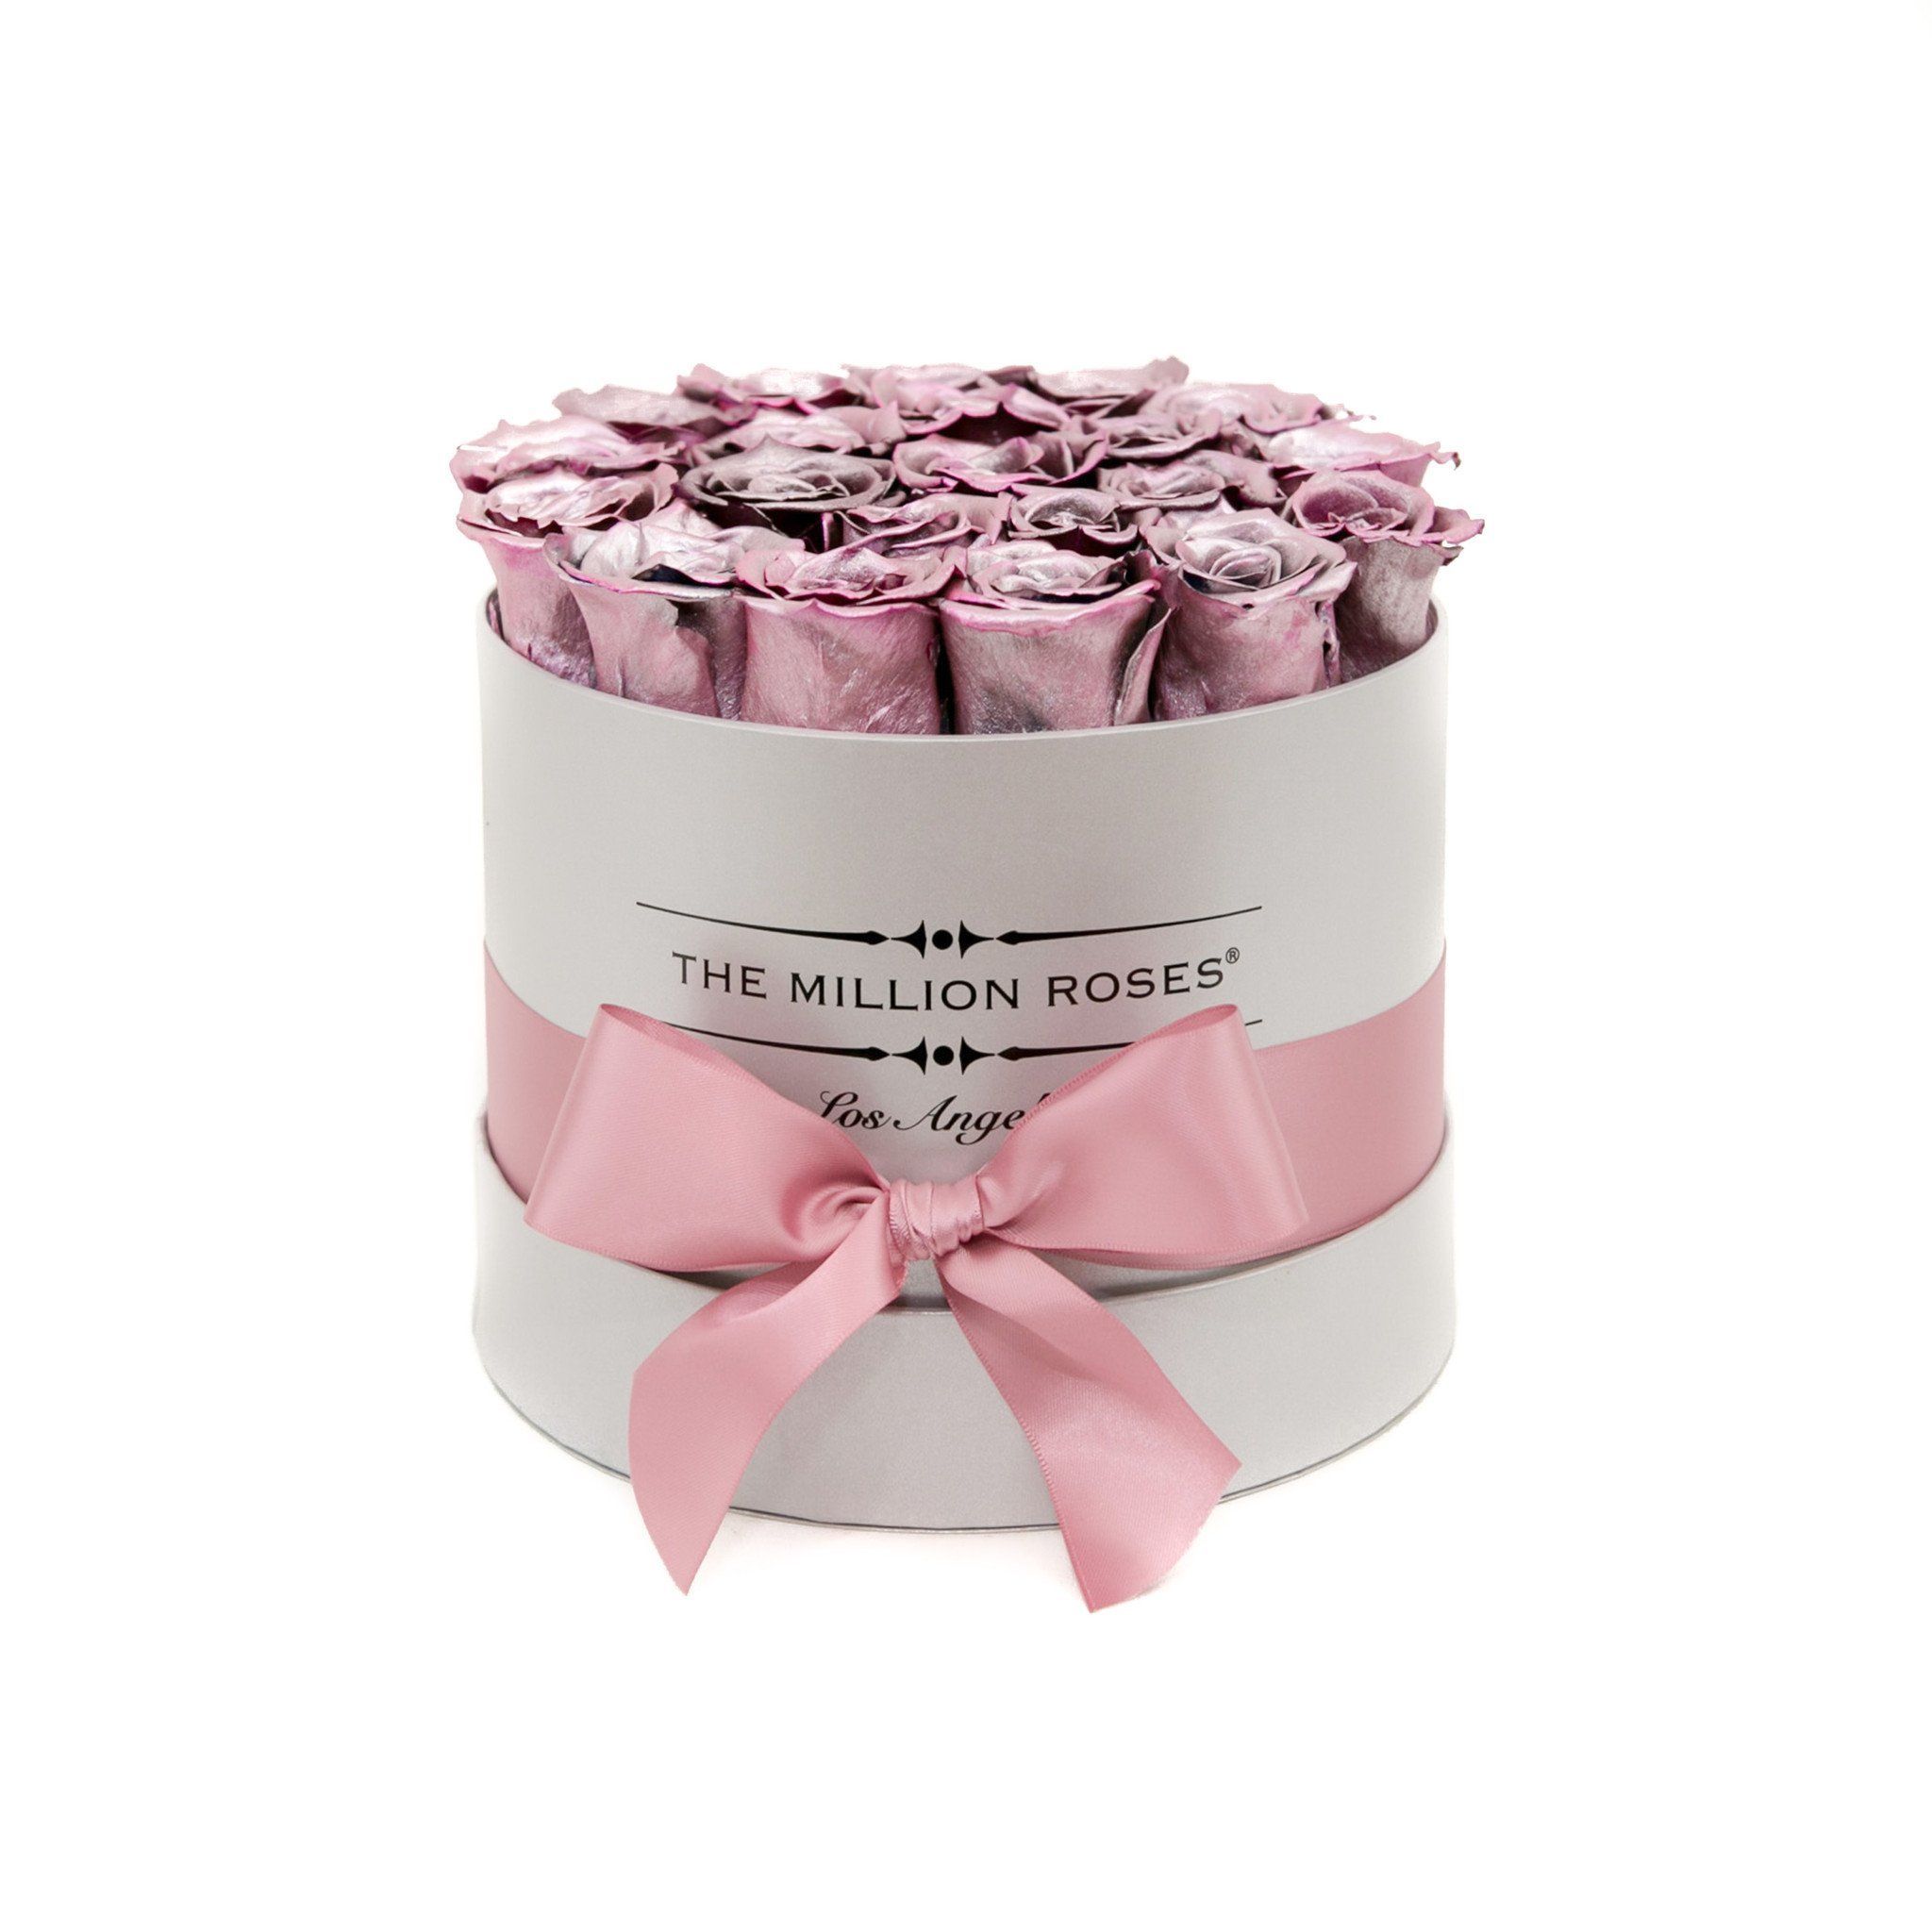 classic round box - mirror-silver - pink gold roses pink gold - the million roses